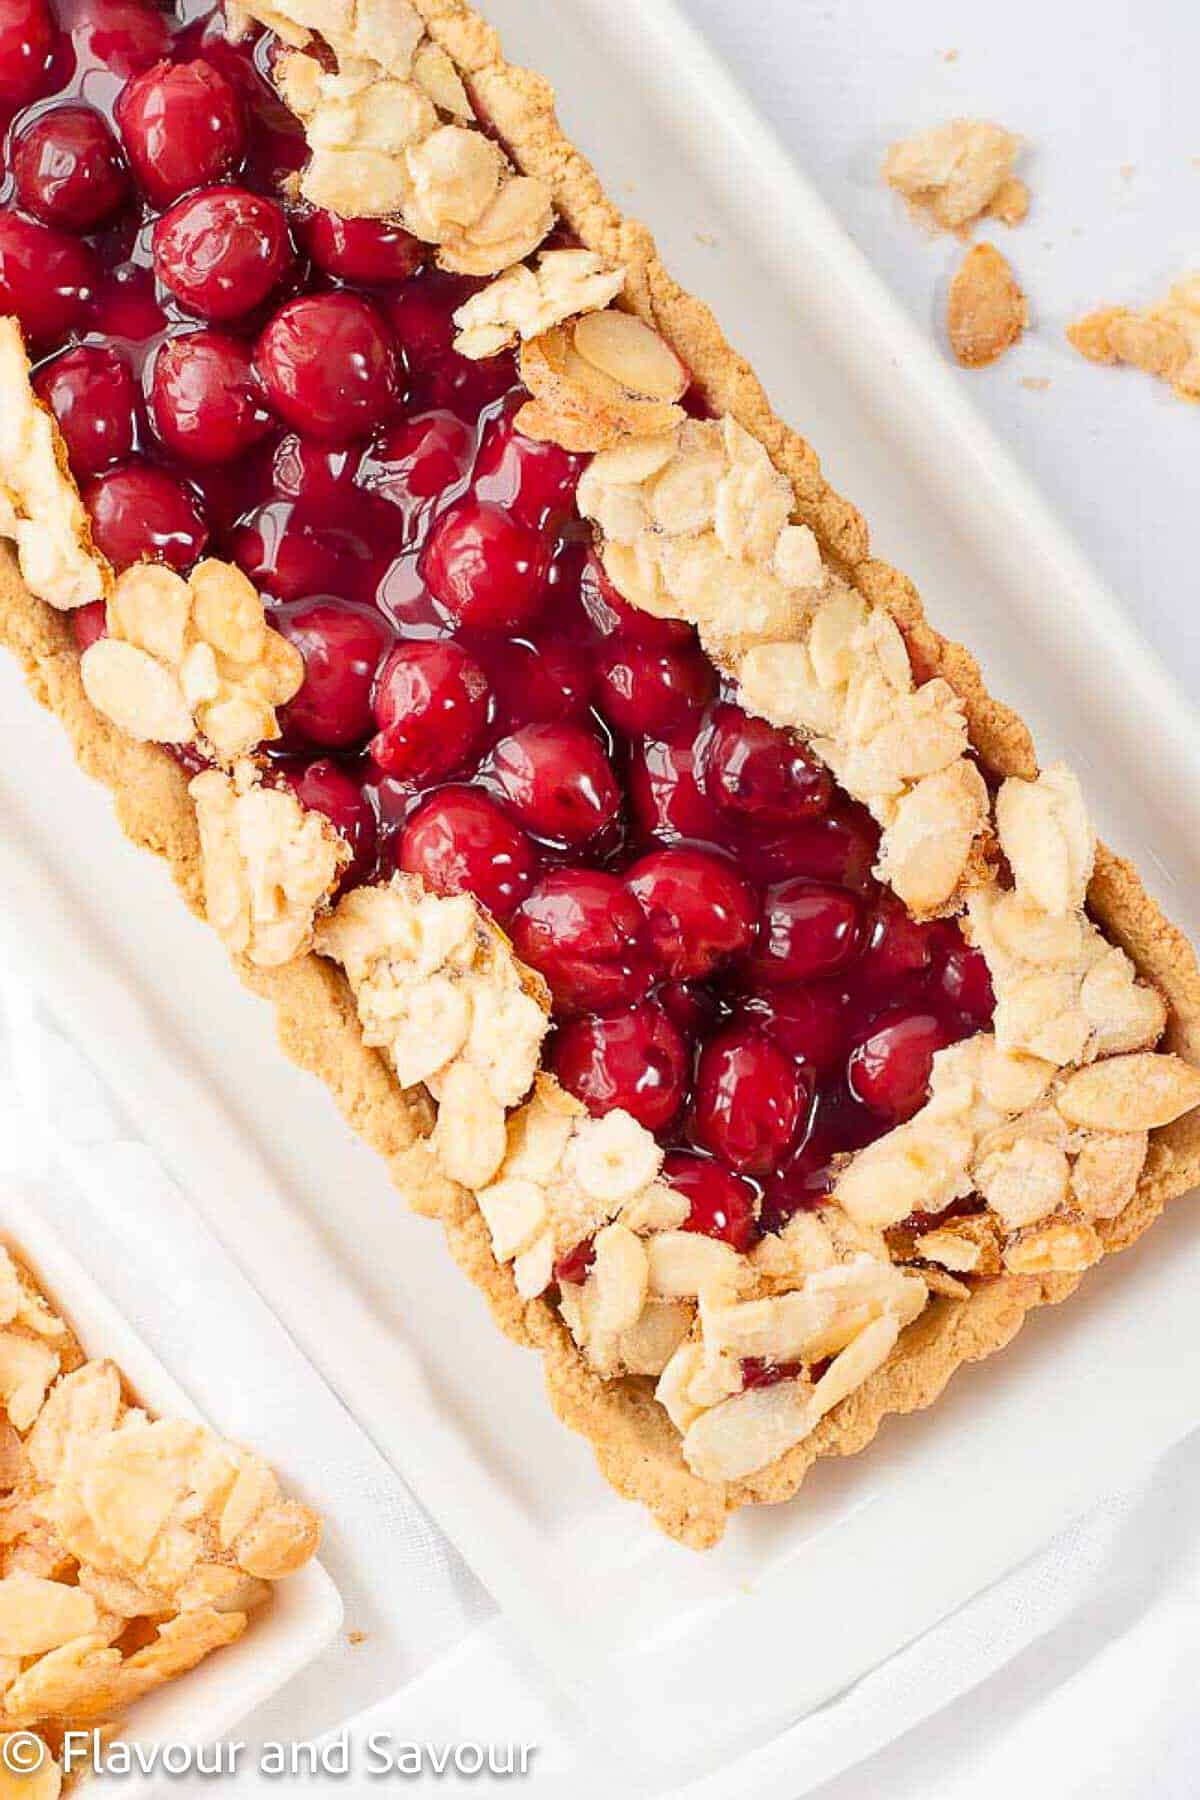 Close-up view of a sour cherry almond tart with a gluten-free crust.